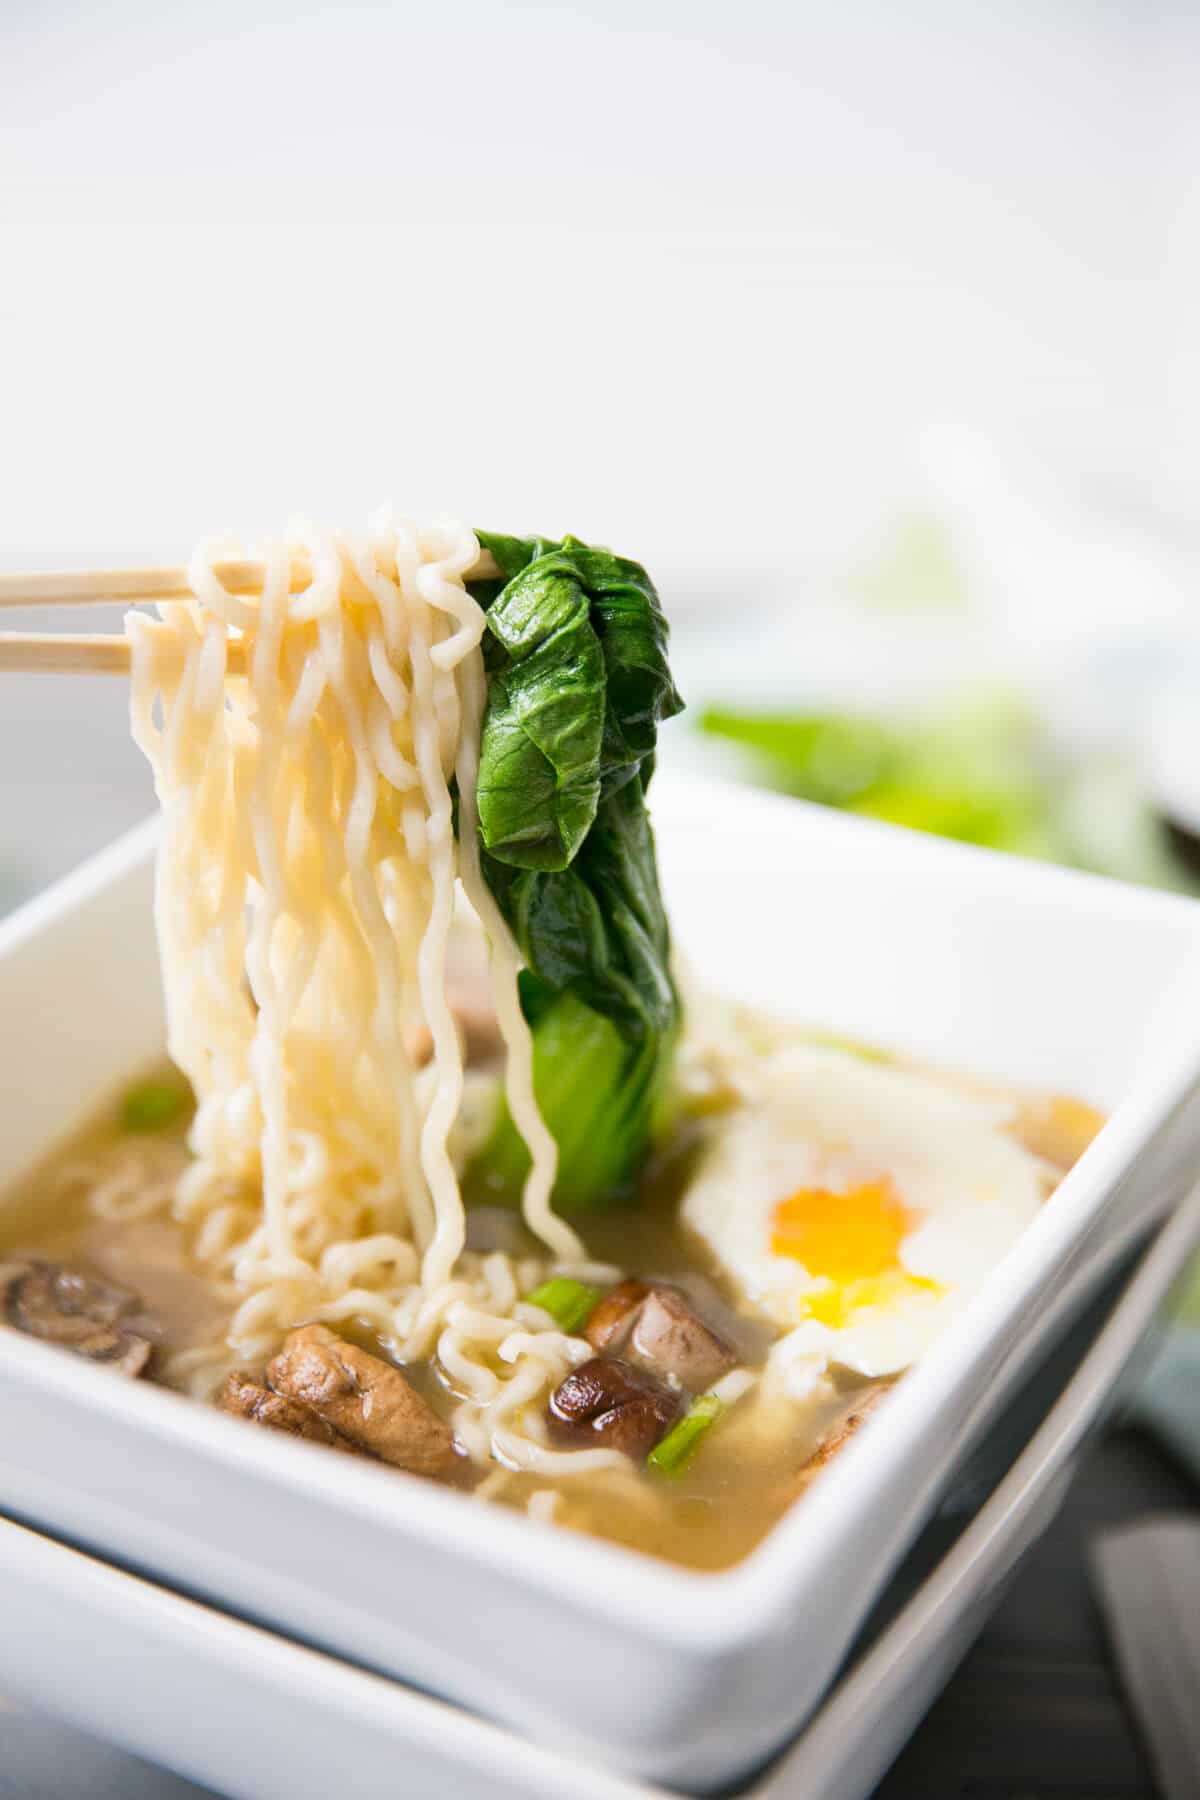 This Ramen Noodle Soup could replace chicken noodle soup as the most comforting soup in the world! The broth is full bodied, the ingredients simple and the process fast and easy!